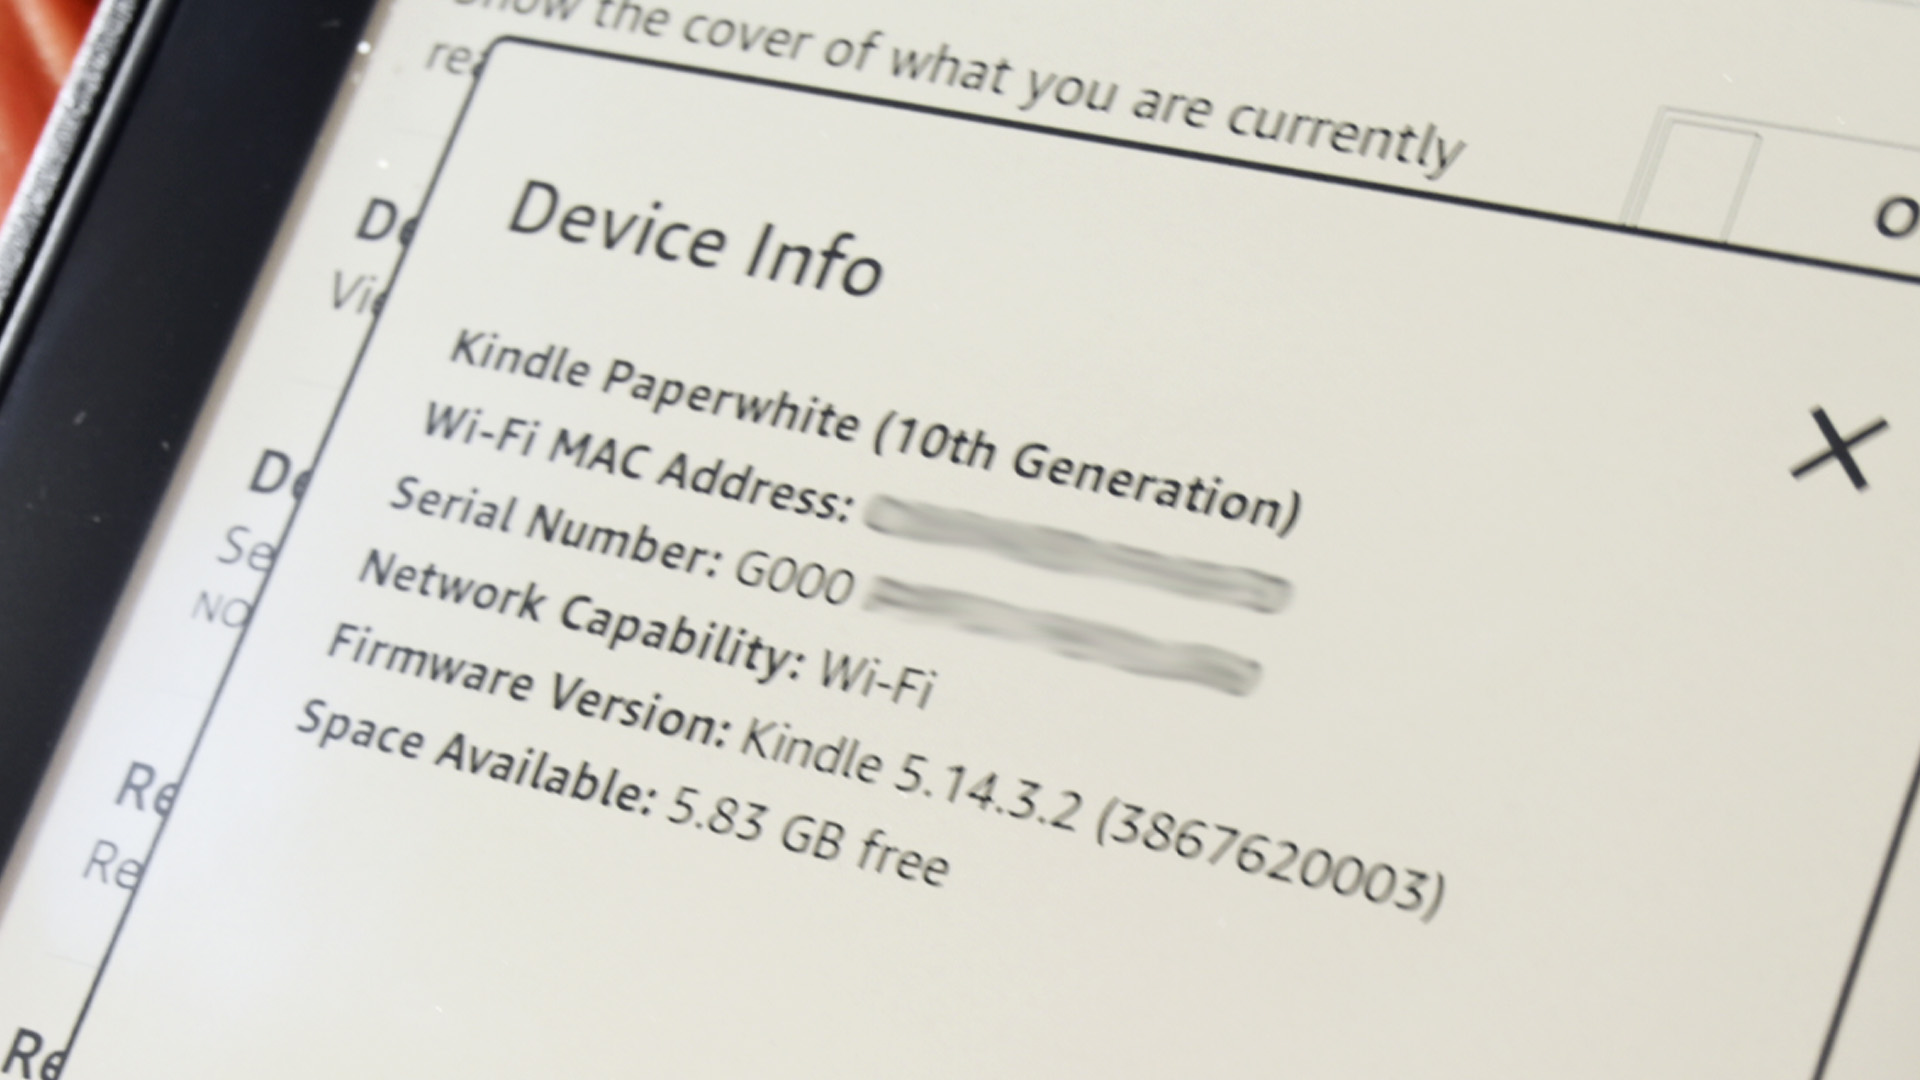 Kindle Paperwhite 4 Device Info 2